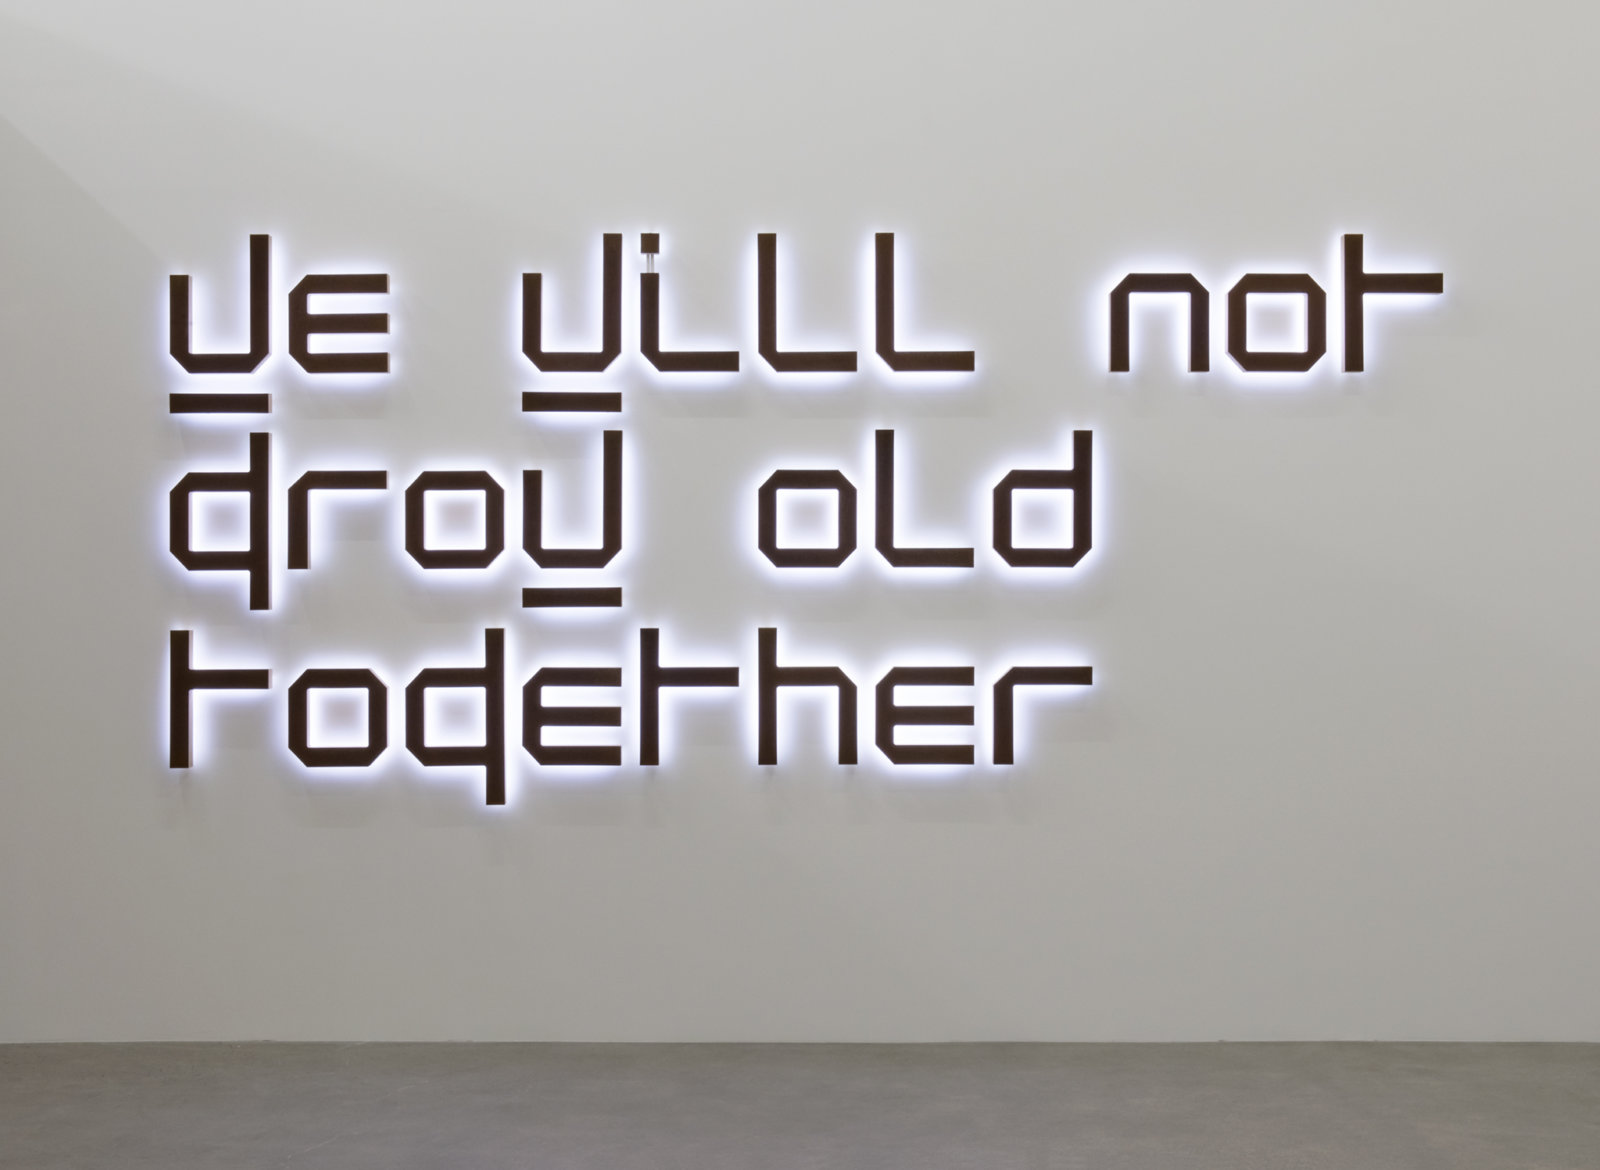 Ron Terada, We Will Not Grow Old Together, 2014, white neon, rusted corten steel, birch plywood, 61 x 136 x 3 in. (155 x 345 x 8 cm)